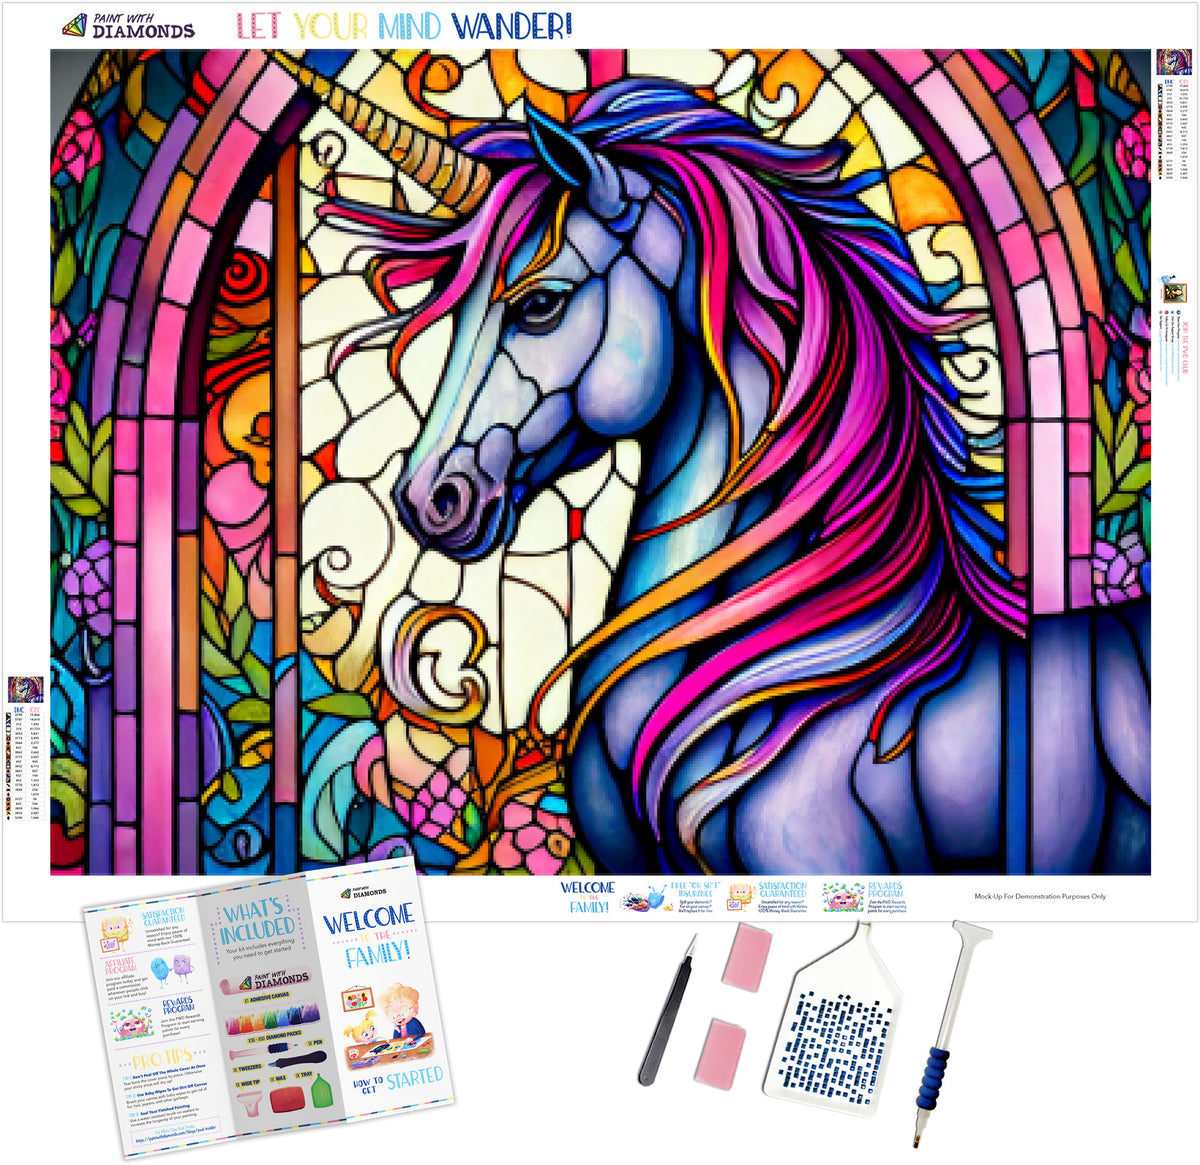 Colorful Castle Stained Glass Official Diamond Painting Kit, Diamond Art